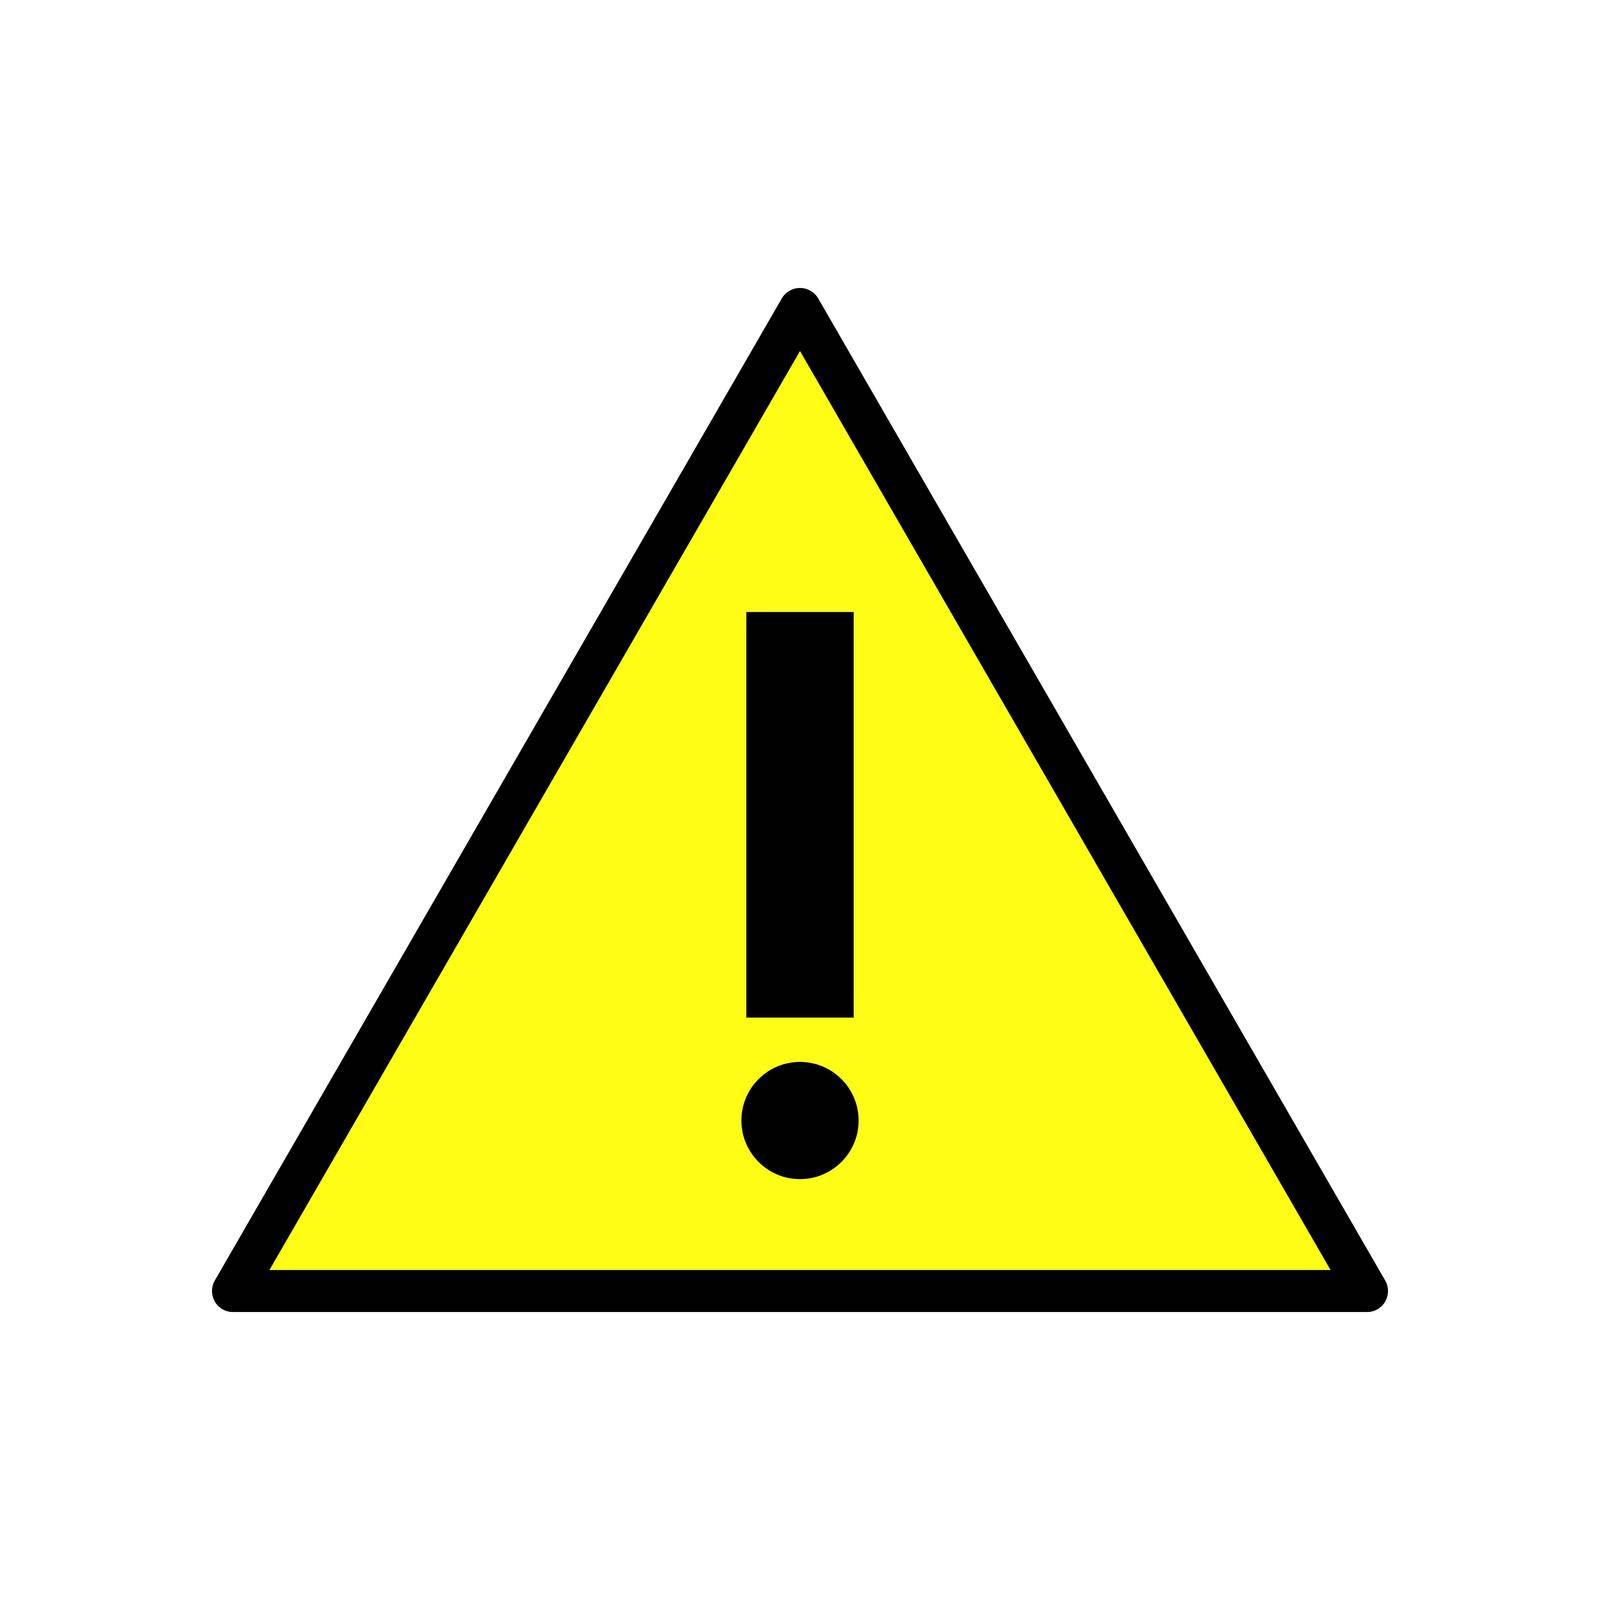 Warning danger sign. Vector illustration. Warning triangle sign with exclamation mark.